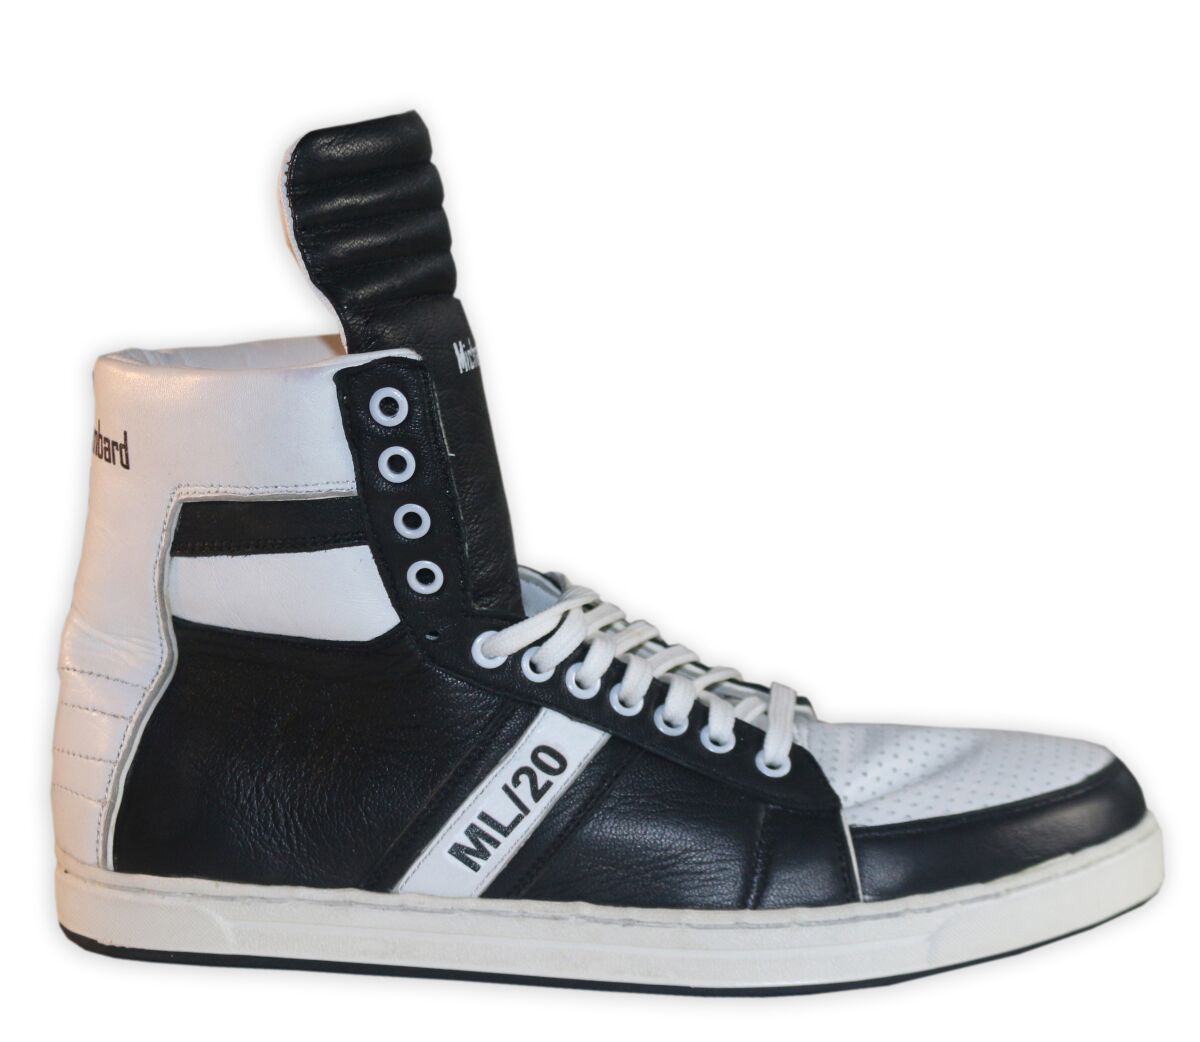 Michael Lombard's black and white ML/20 high-top leather sneakers.